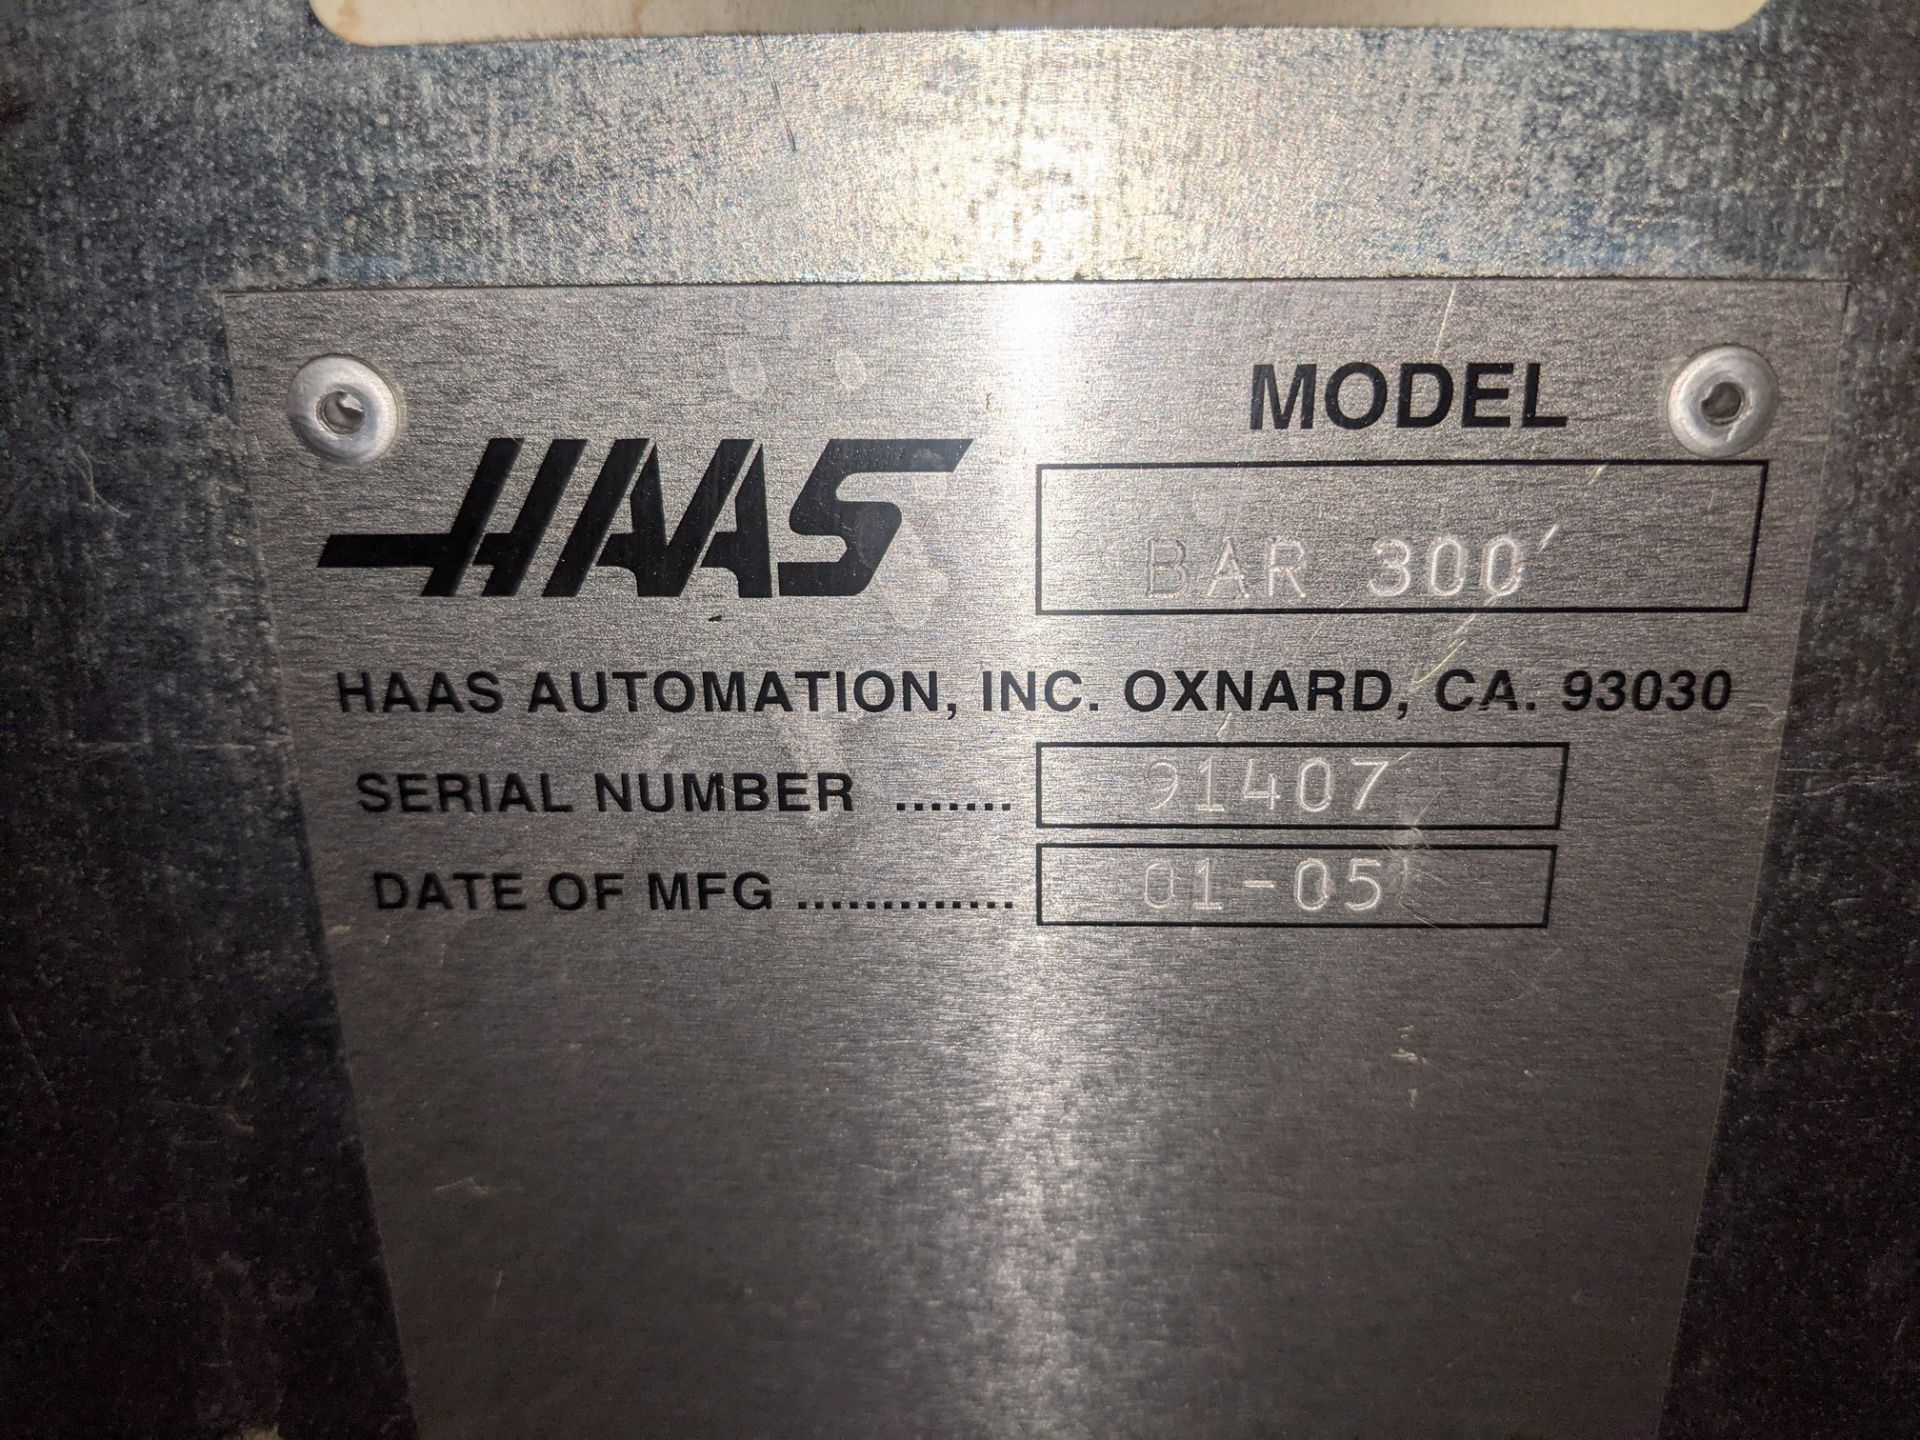 2005 HAAS SL-30T CNC LATHE, CNC CONTROL, 10” 3-JAW CHUCK, TAILSTOCK, TOOL PRESETTER, 12-STATION - Image 22 of 27